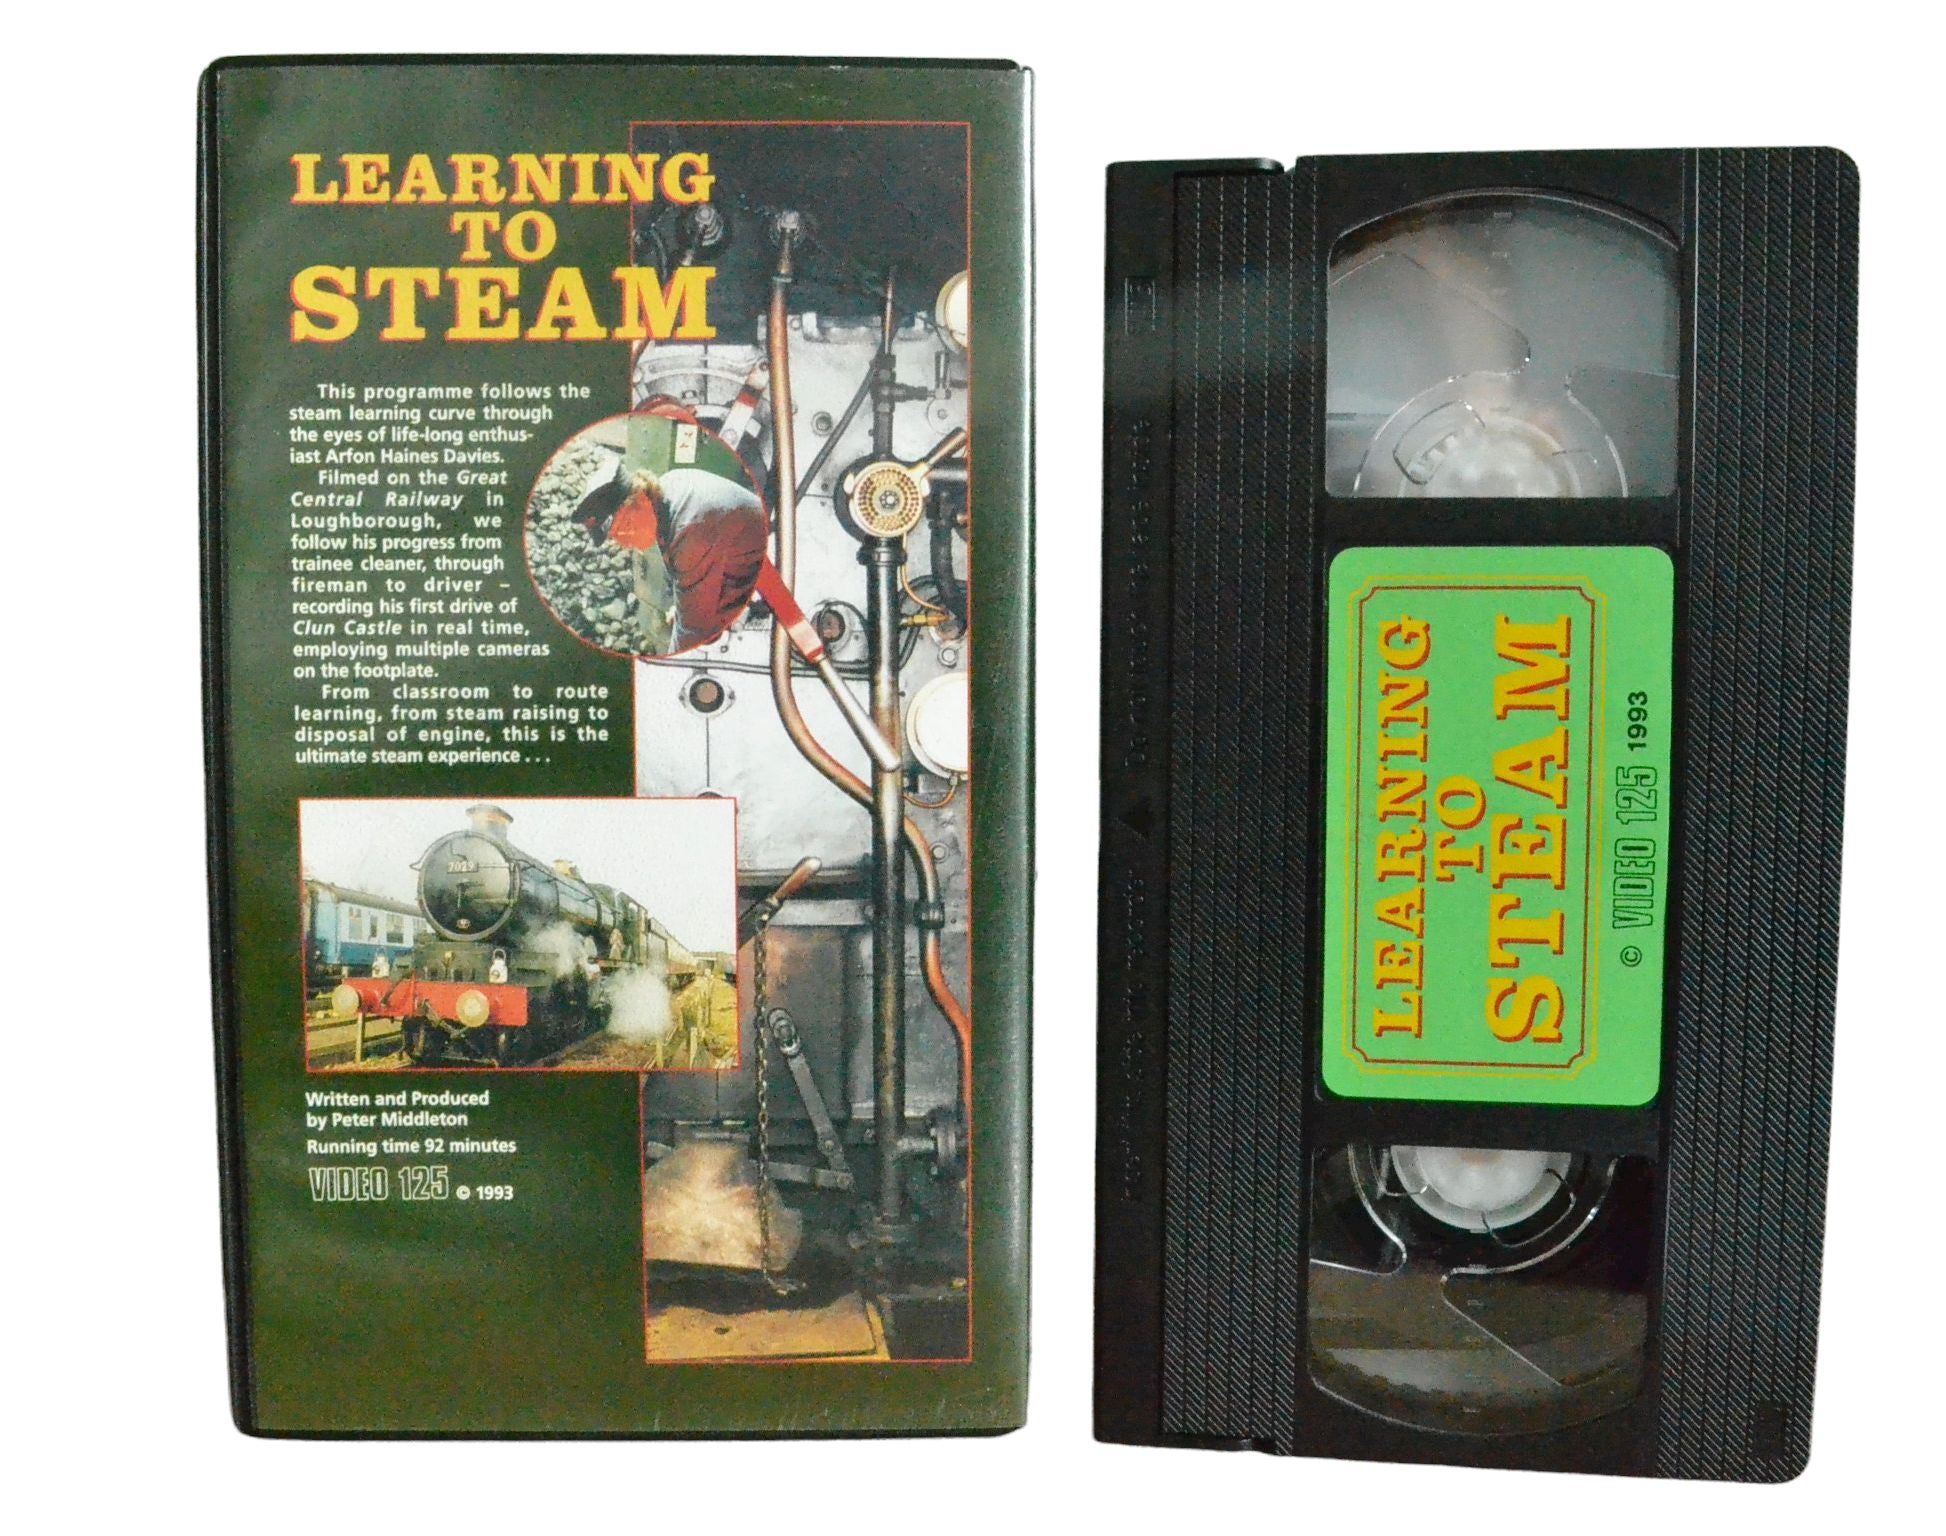 Learning To Steam - Arfon Haines Davies - Video 125 - Vintage - Pal VHS-